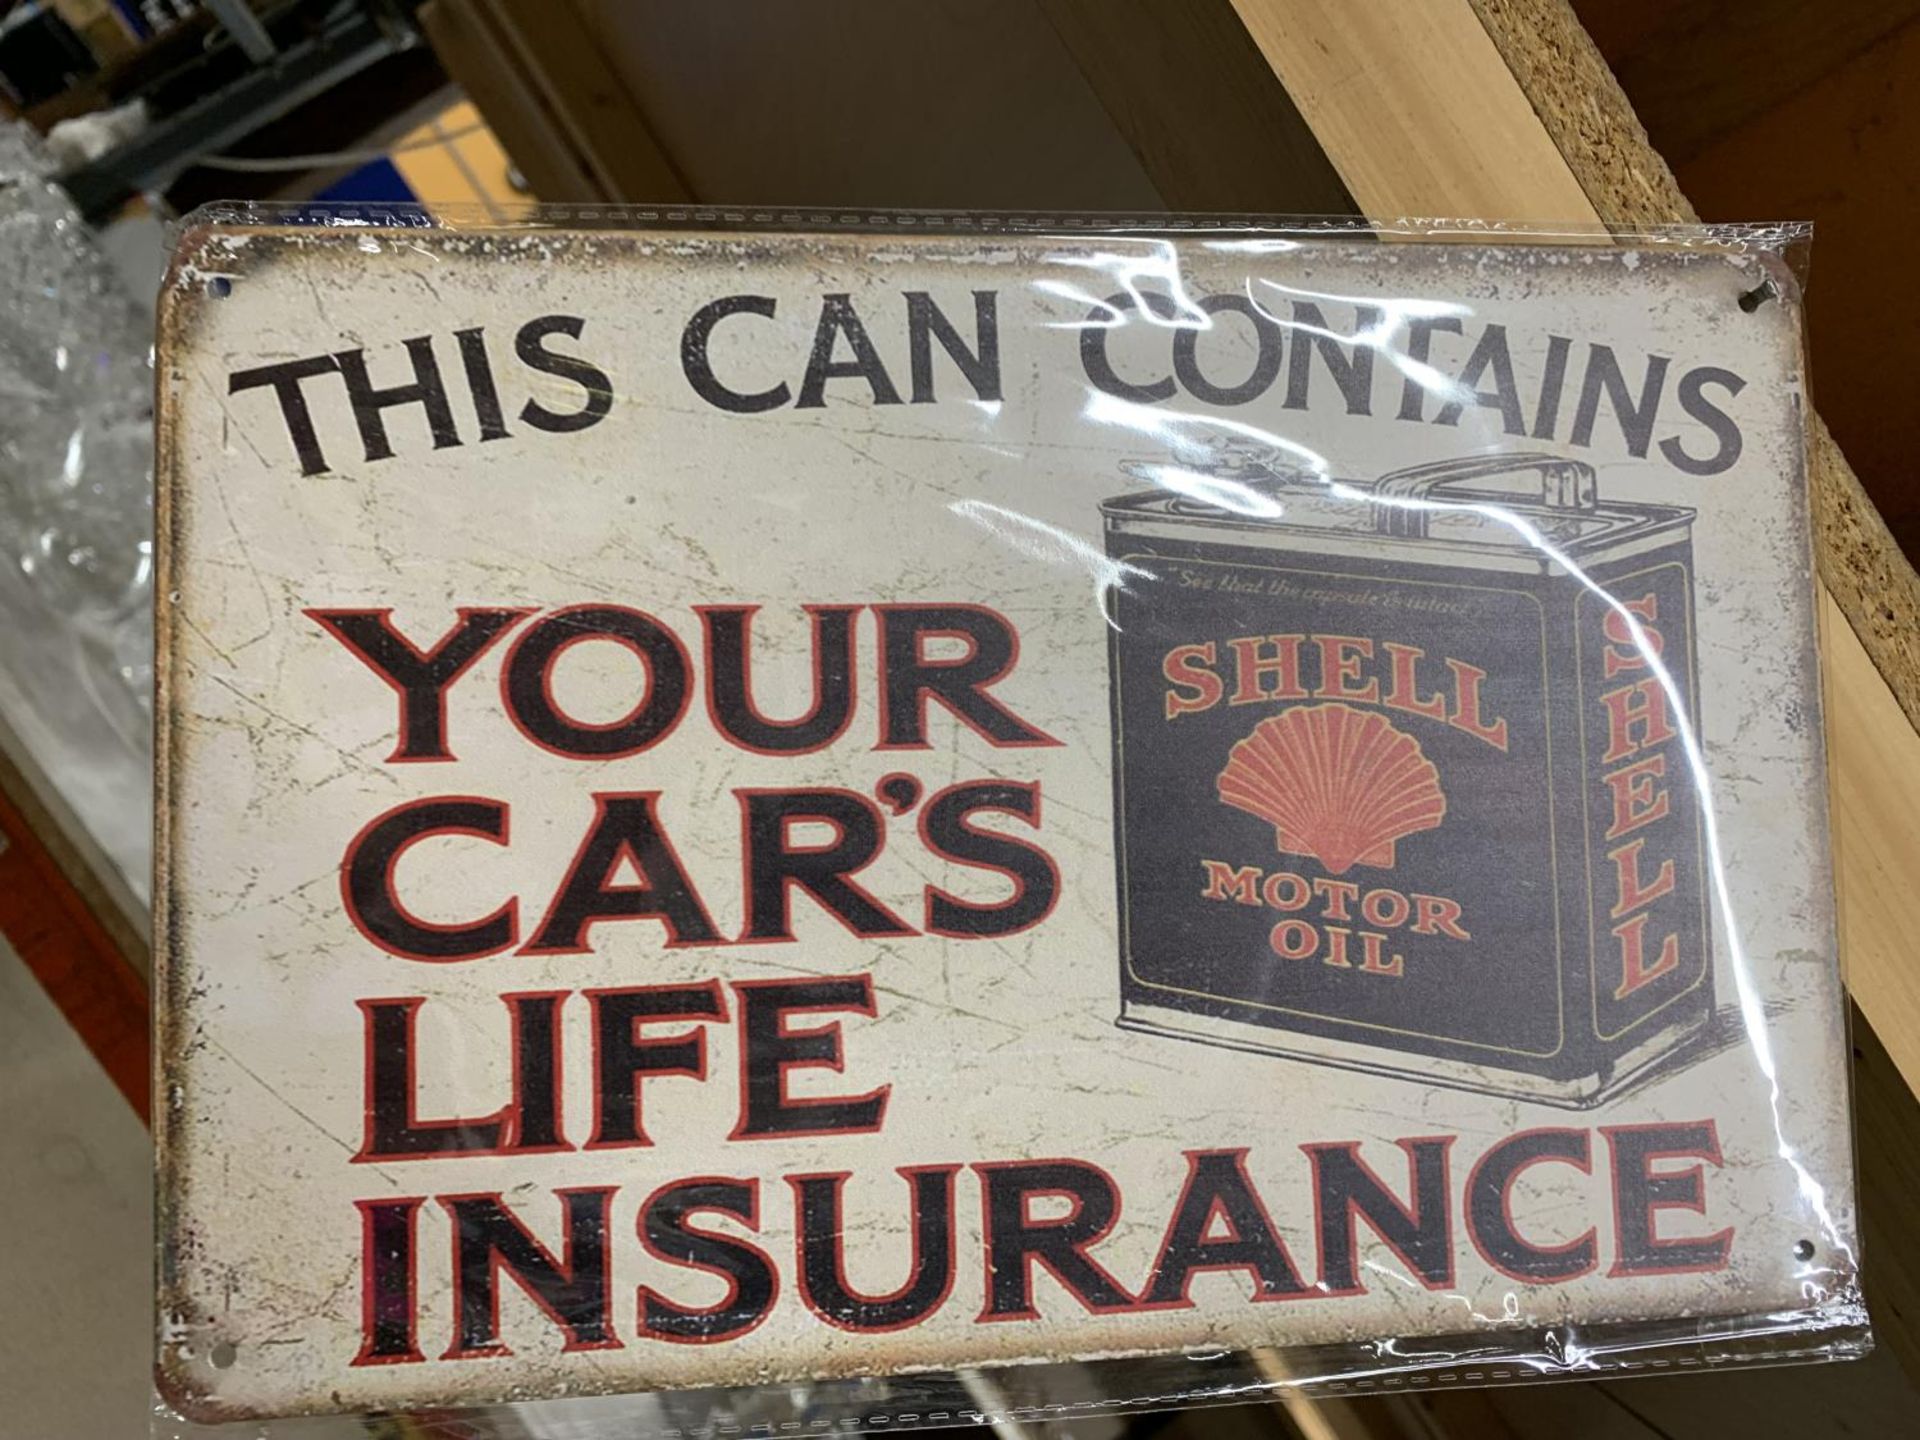 A SHELL MOTOR OIL METAL SIGN